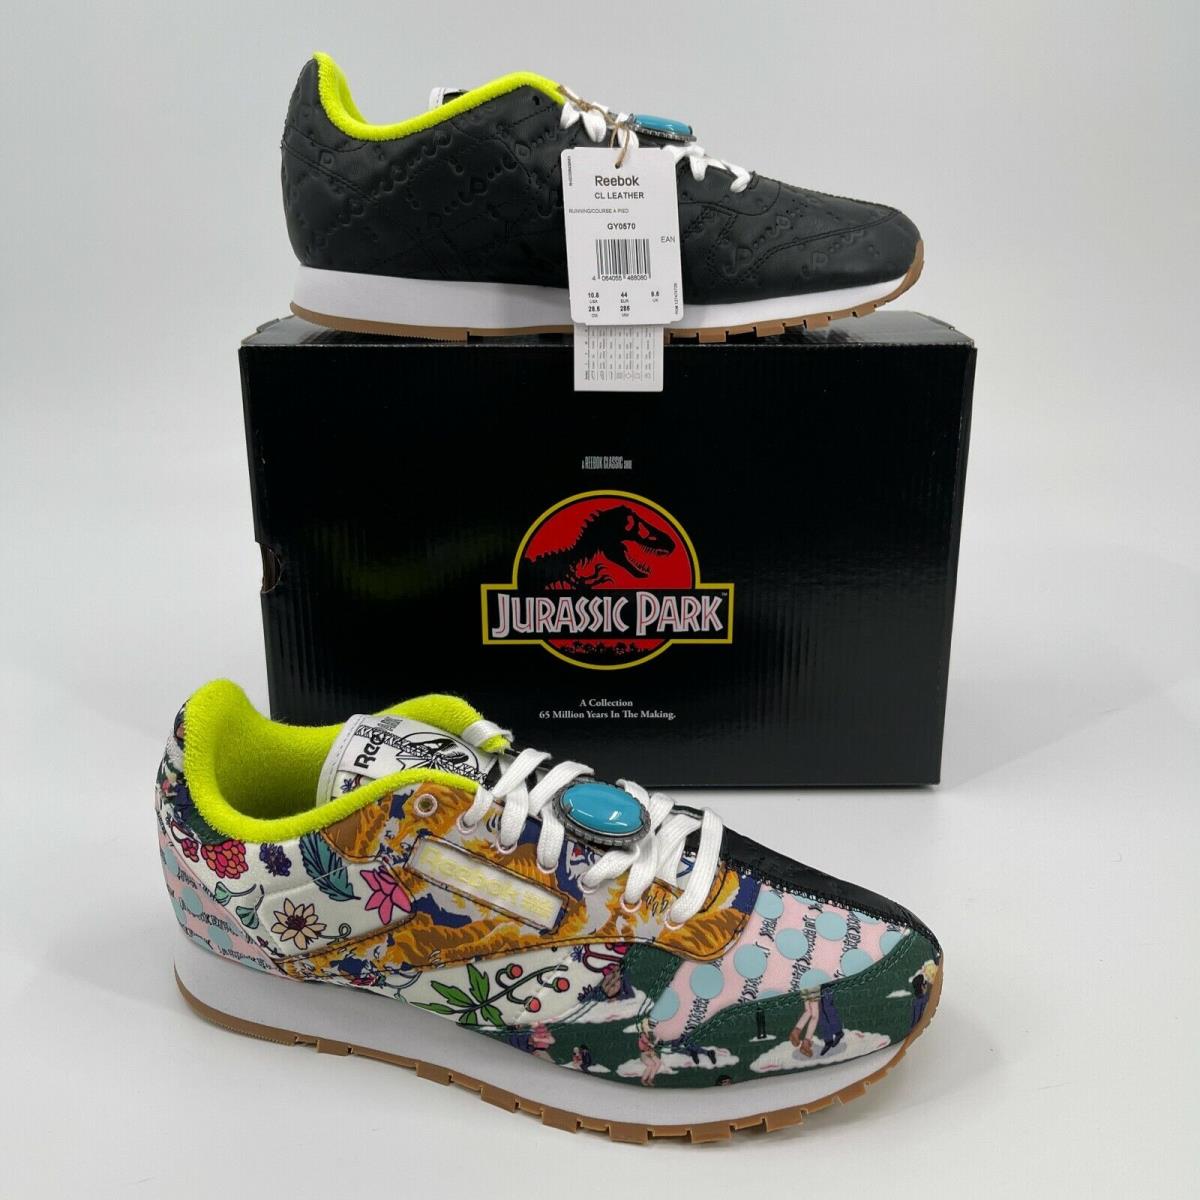 Reebok x Jurassic Park Classic Leather Shoes Sneakers Size 10.5 with Box